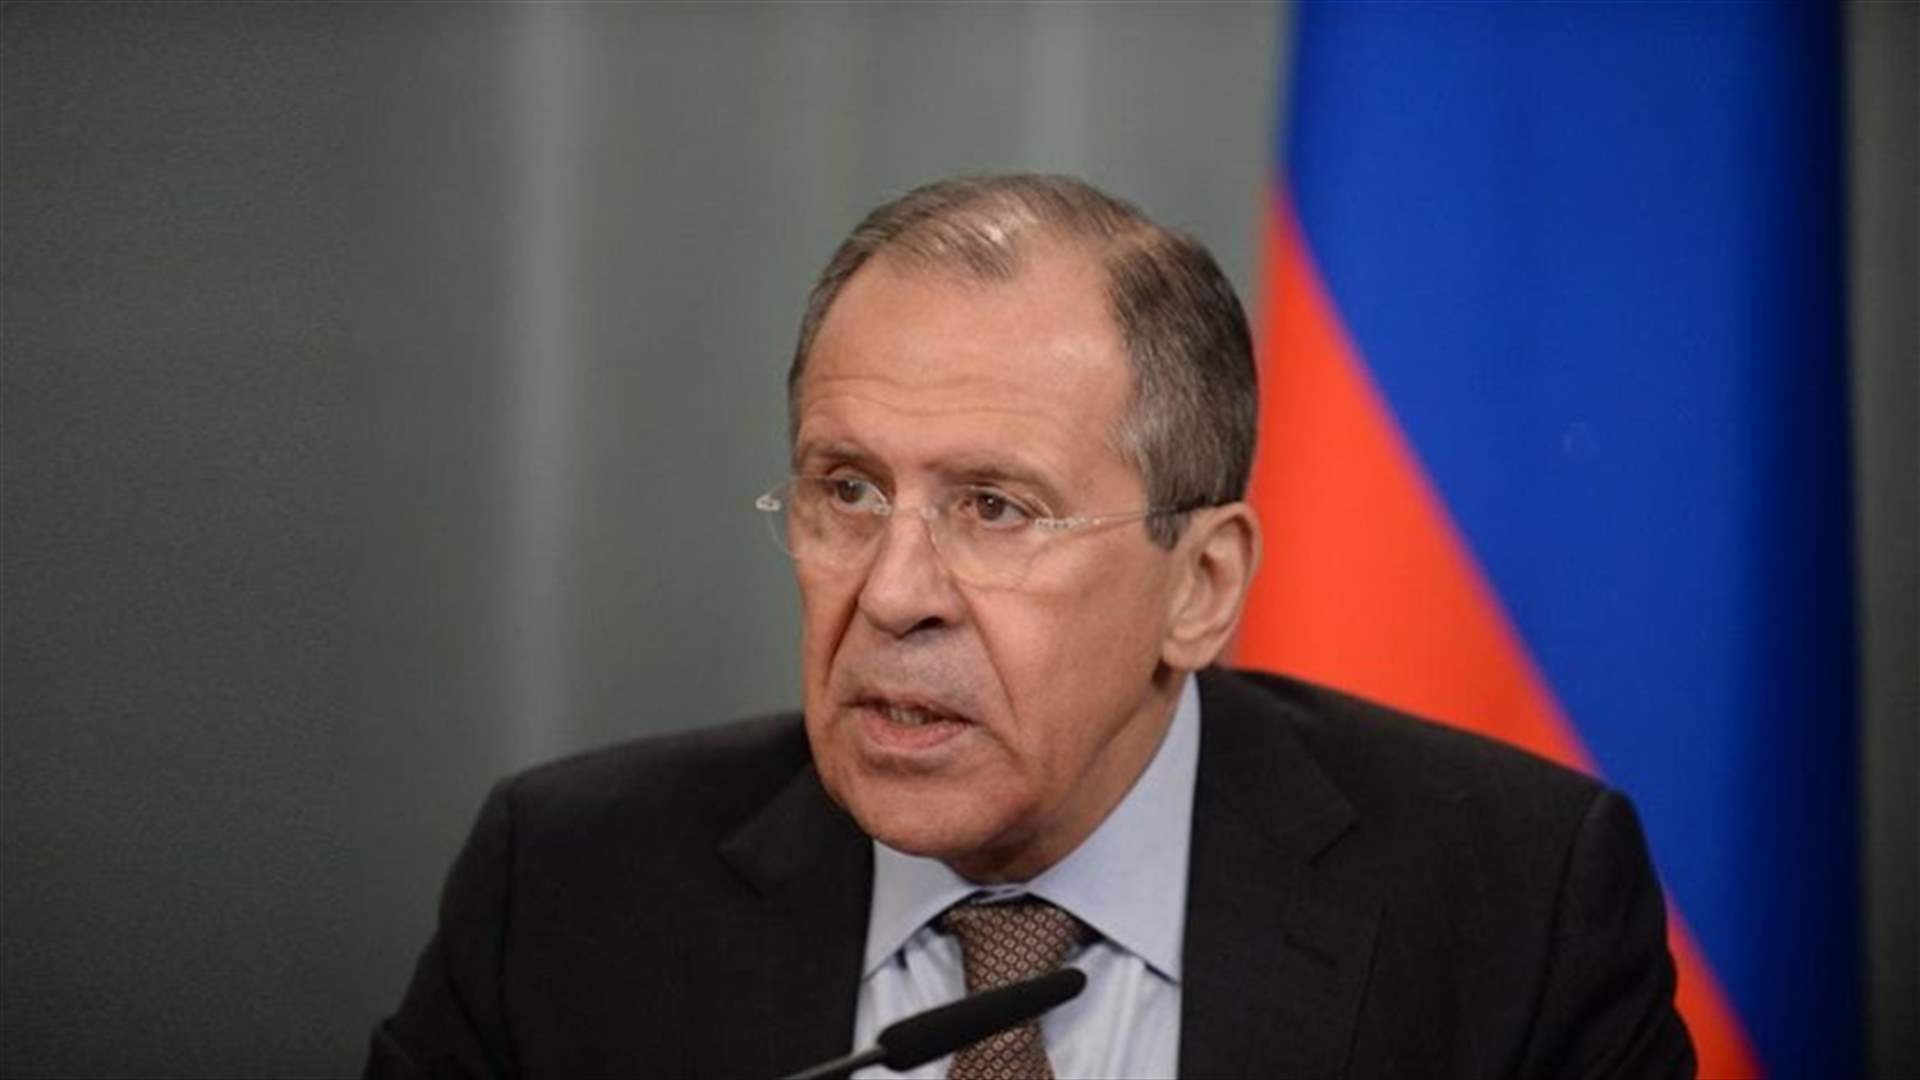 Reports of hundreds of Russians killed in Syria attempt to exploit war - RIA cites Lavrov